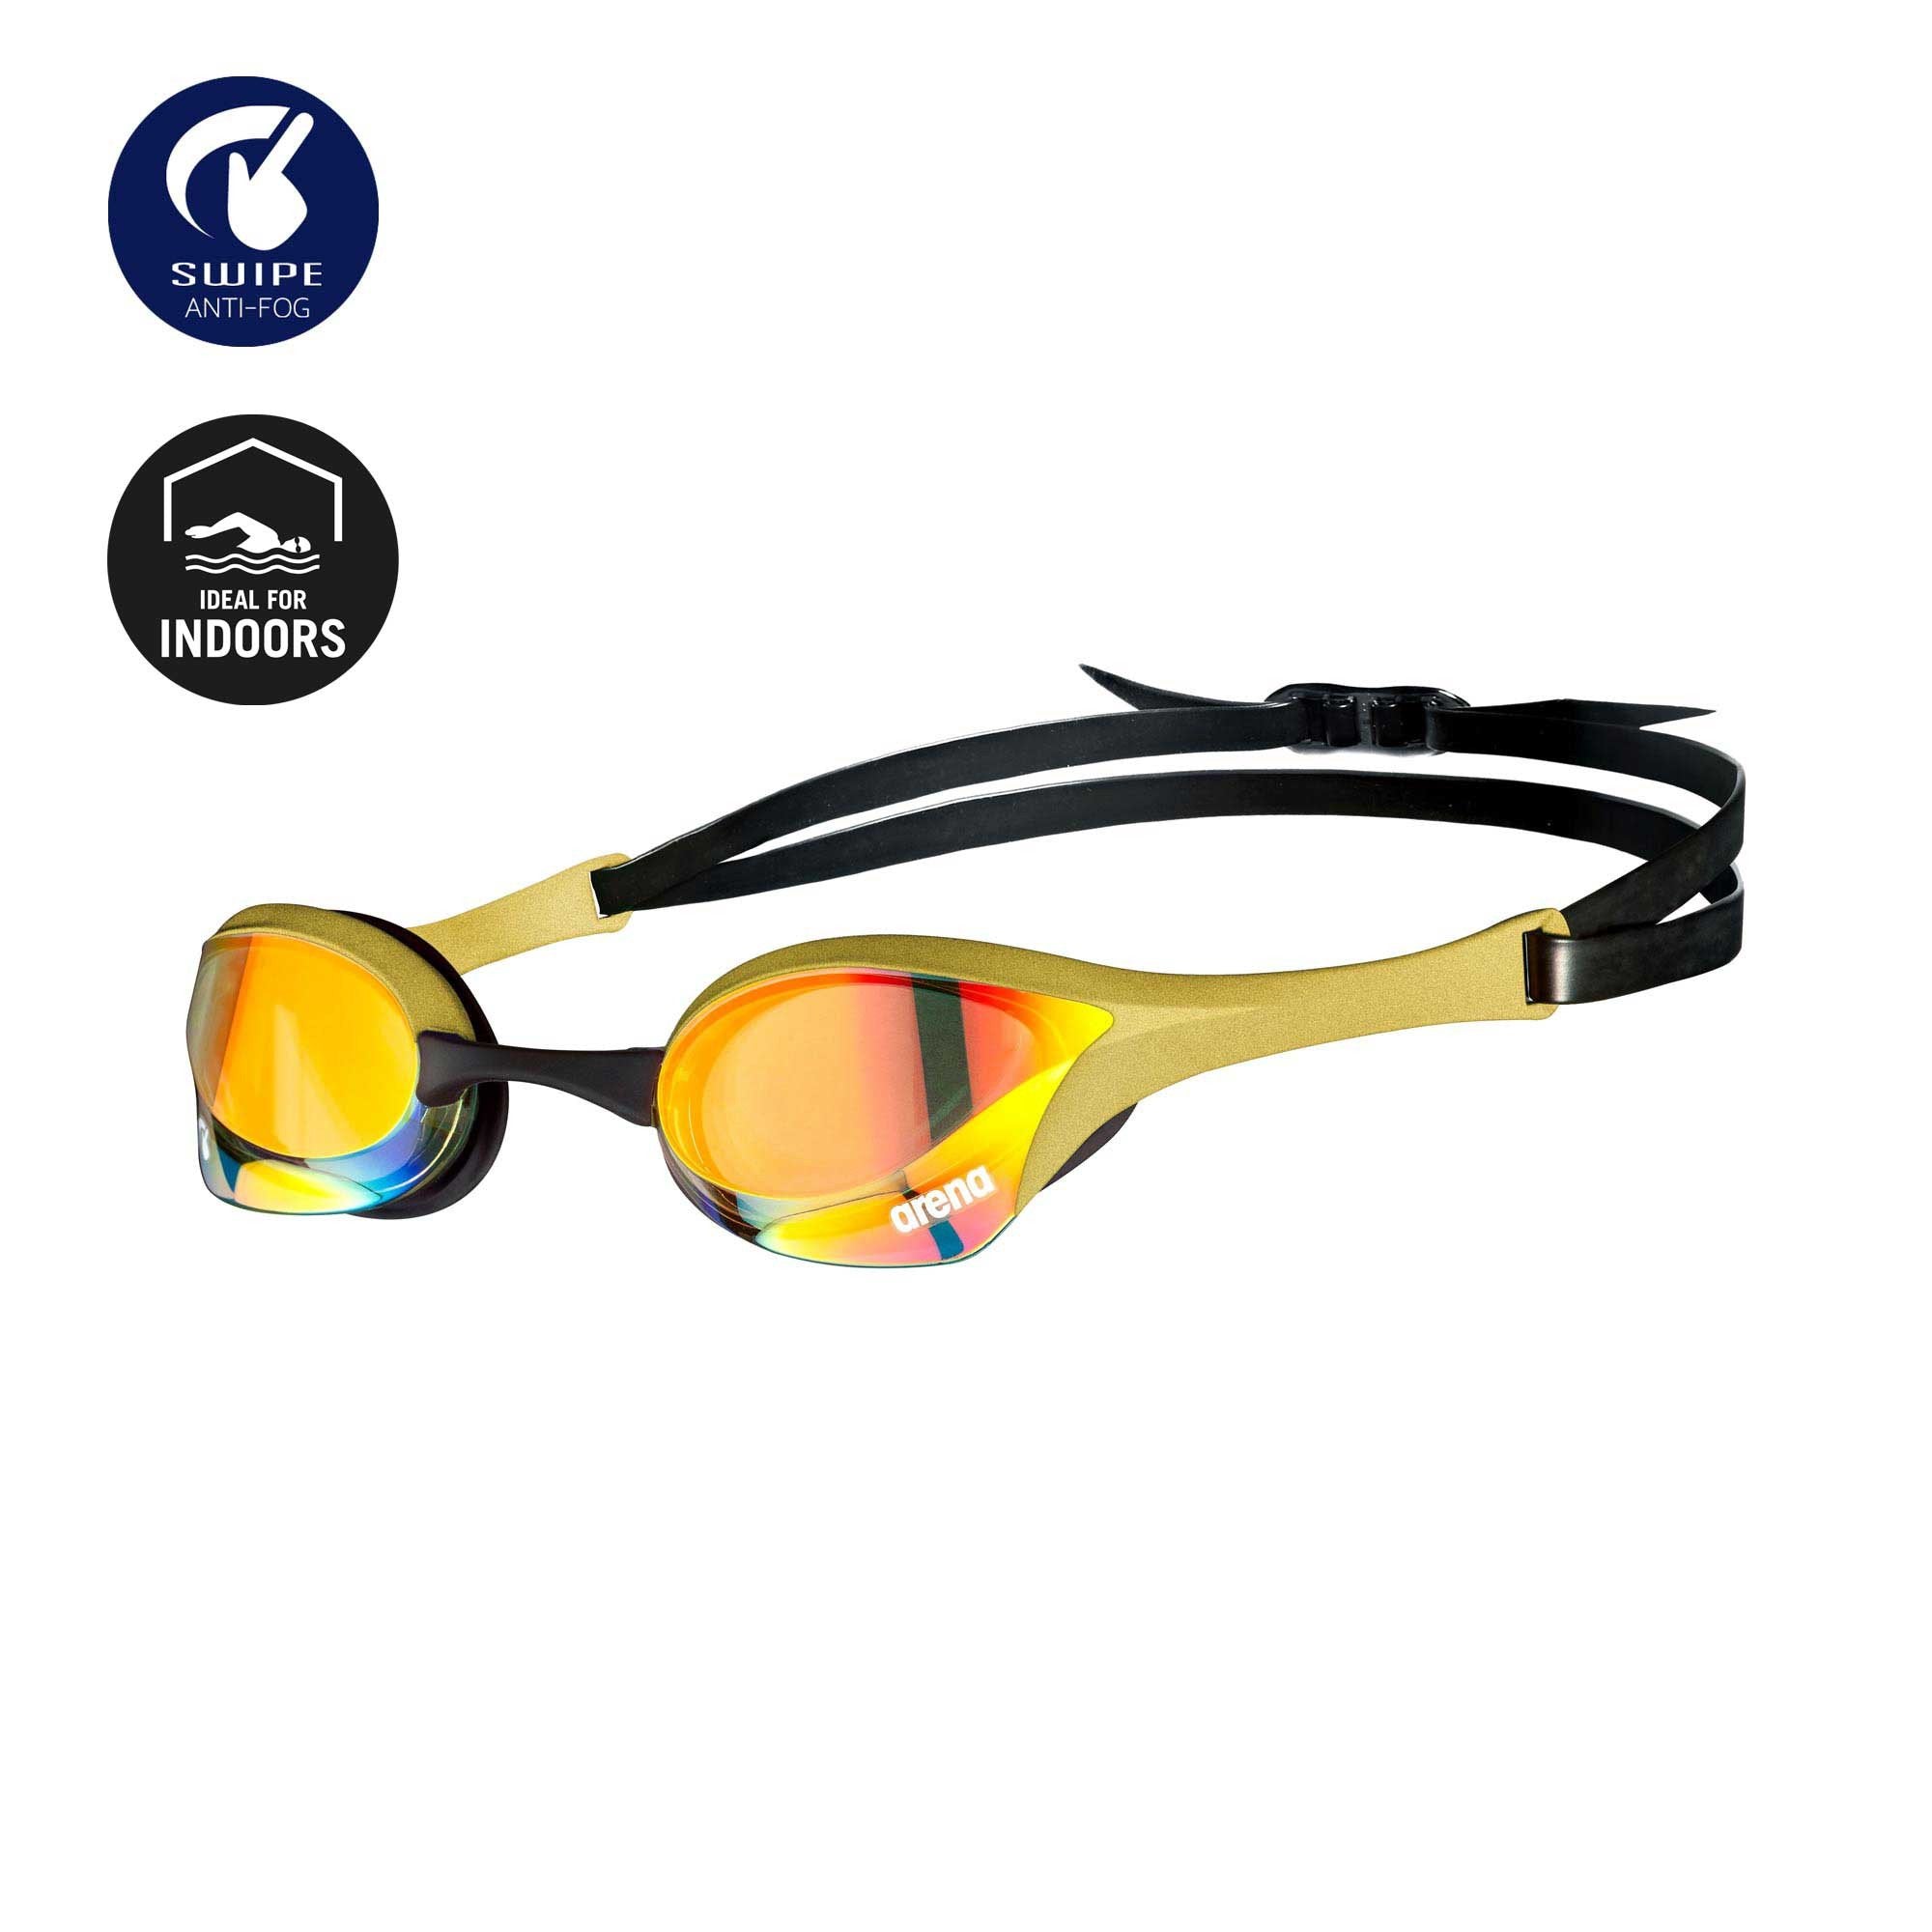 OTB Sport - The Arena Cobra Ultra Swipe Mirror Goggles have arrived.  Discover the the most advanced anti-fog protection ever! arena's new  Anti-Fog Swipe Technology is a groundbreaking new approach to solving